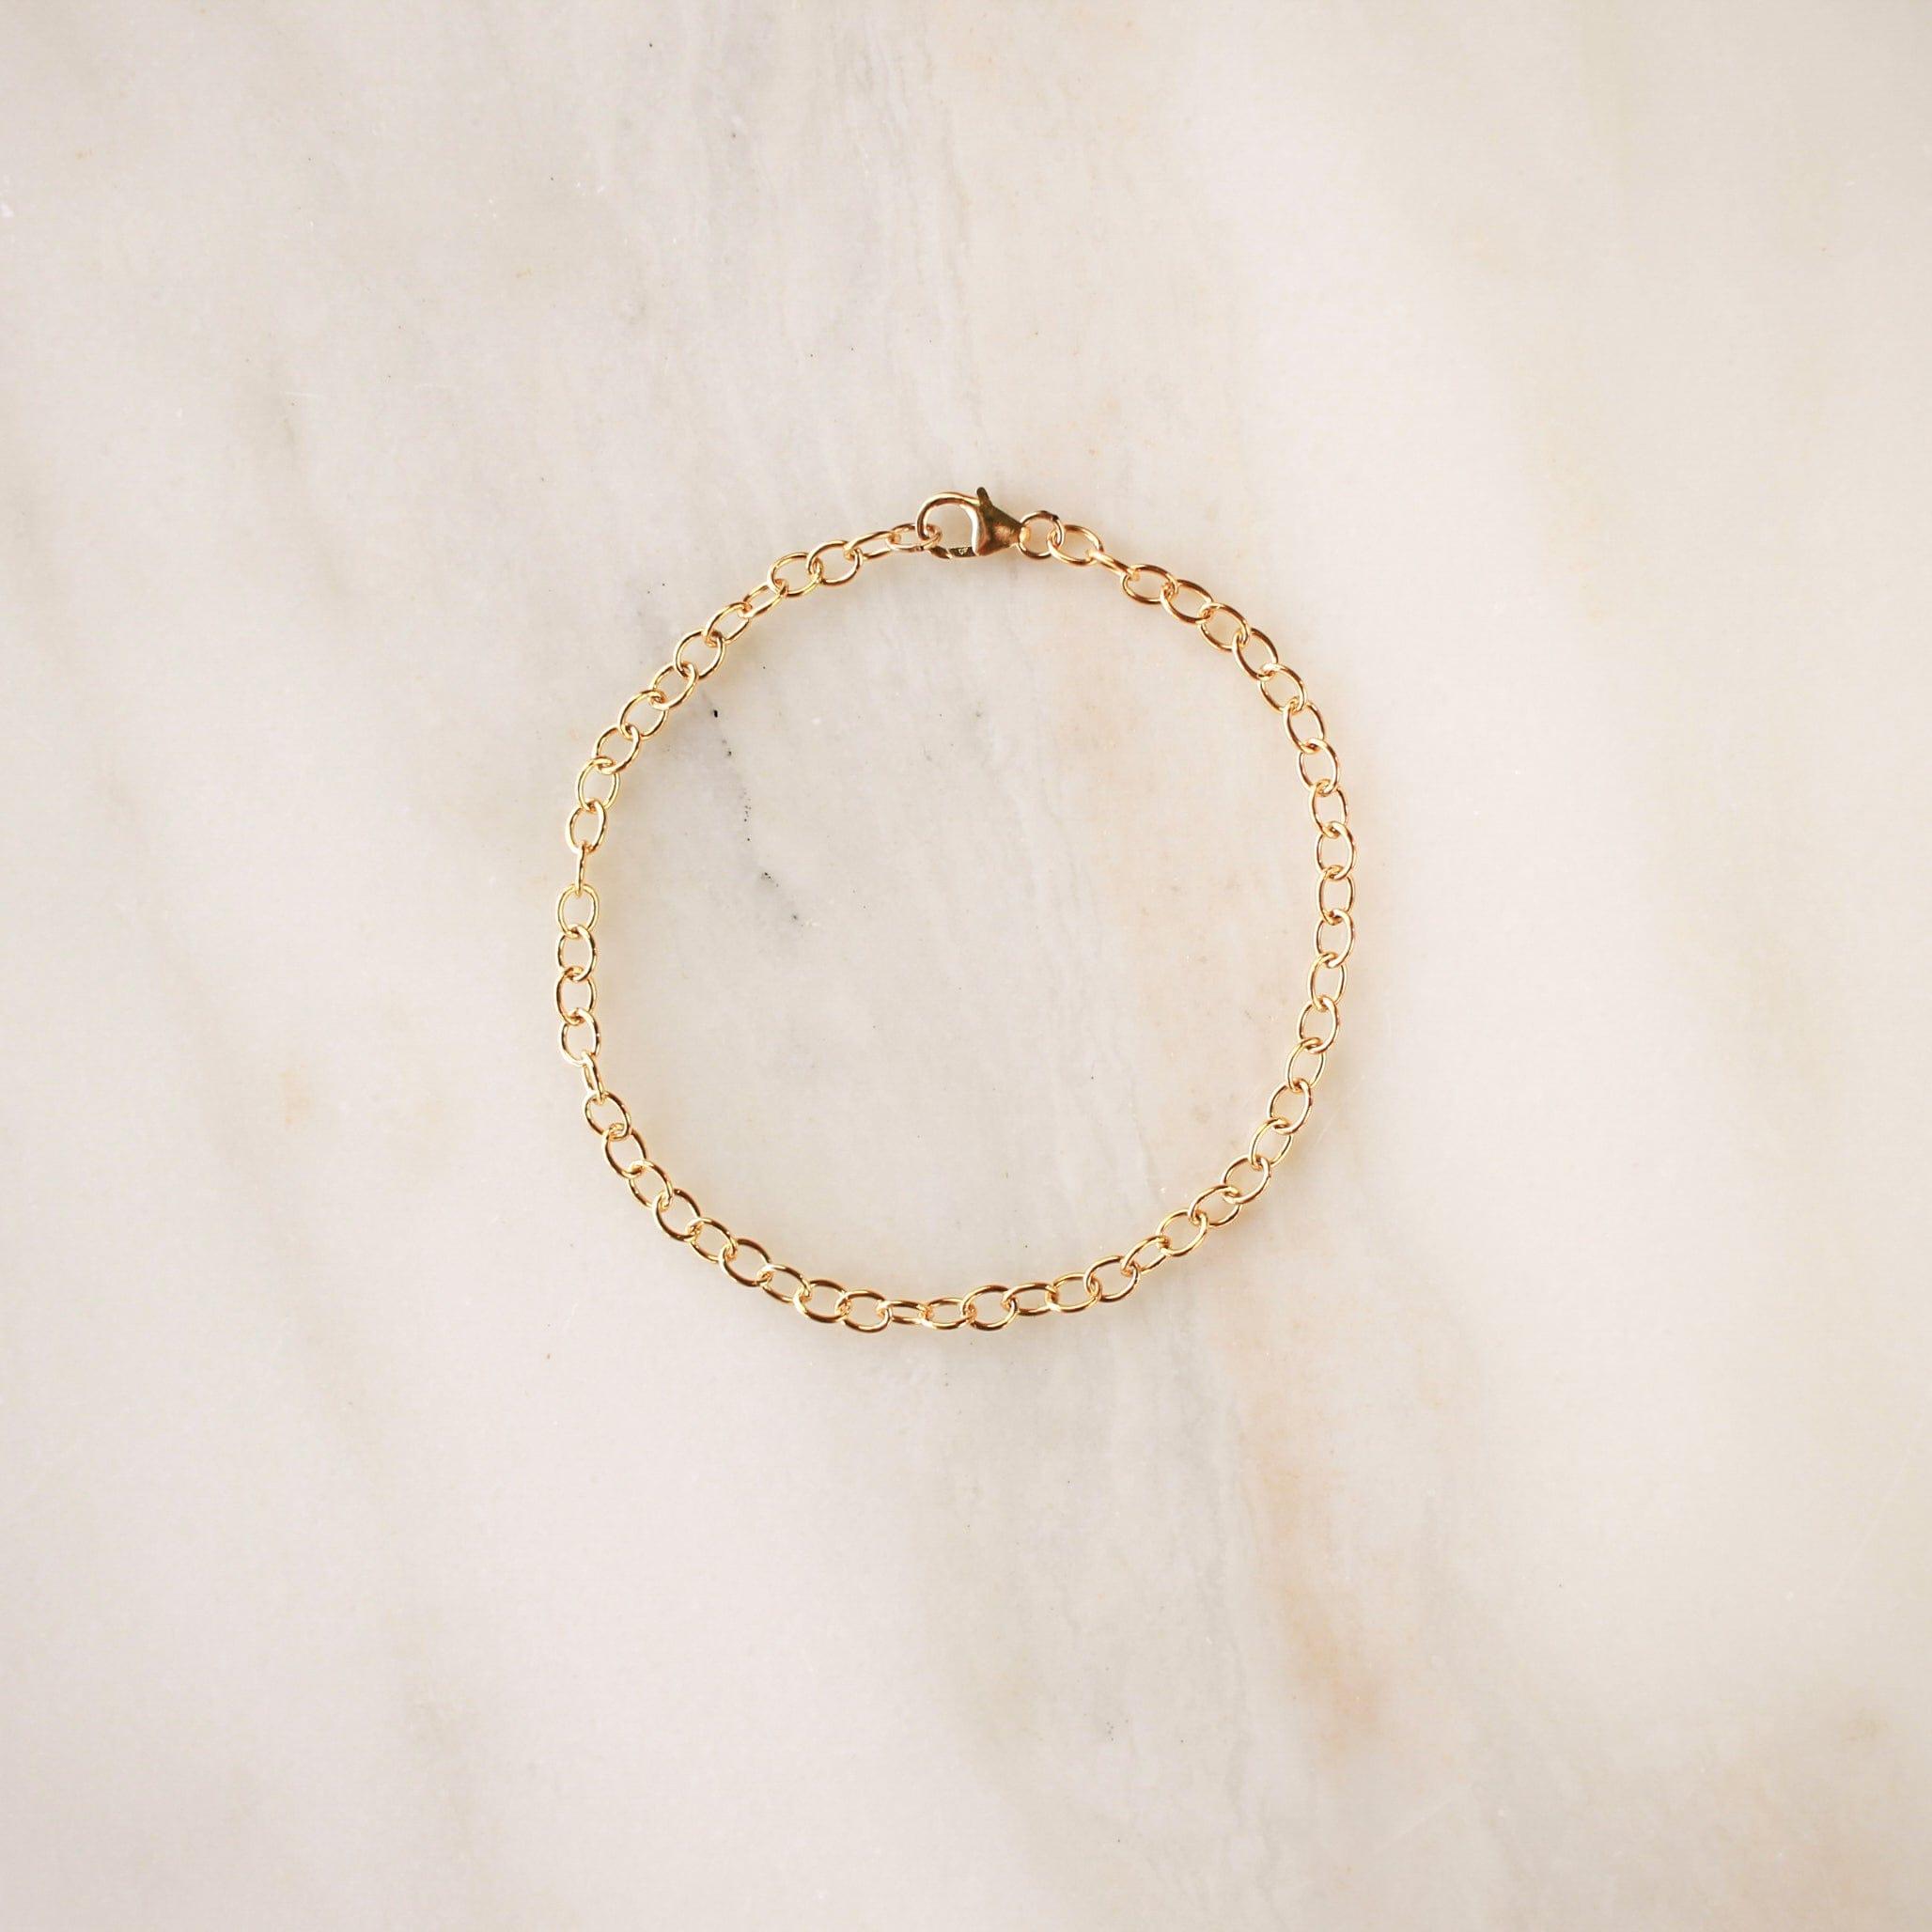 Vogue Chain Bracelet - Nolia Jewelry - Meaningful + Sustainably Handcrafted Jewelry